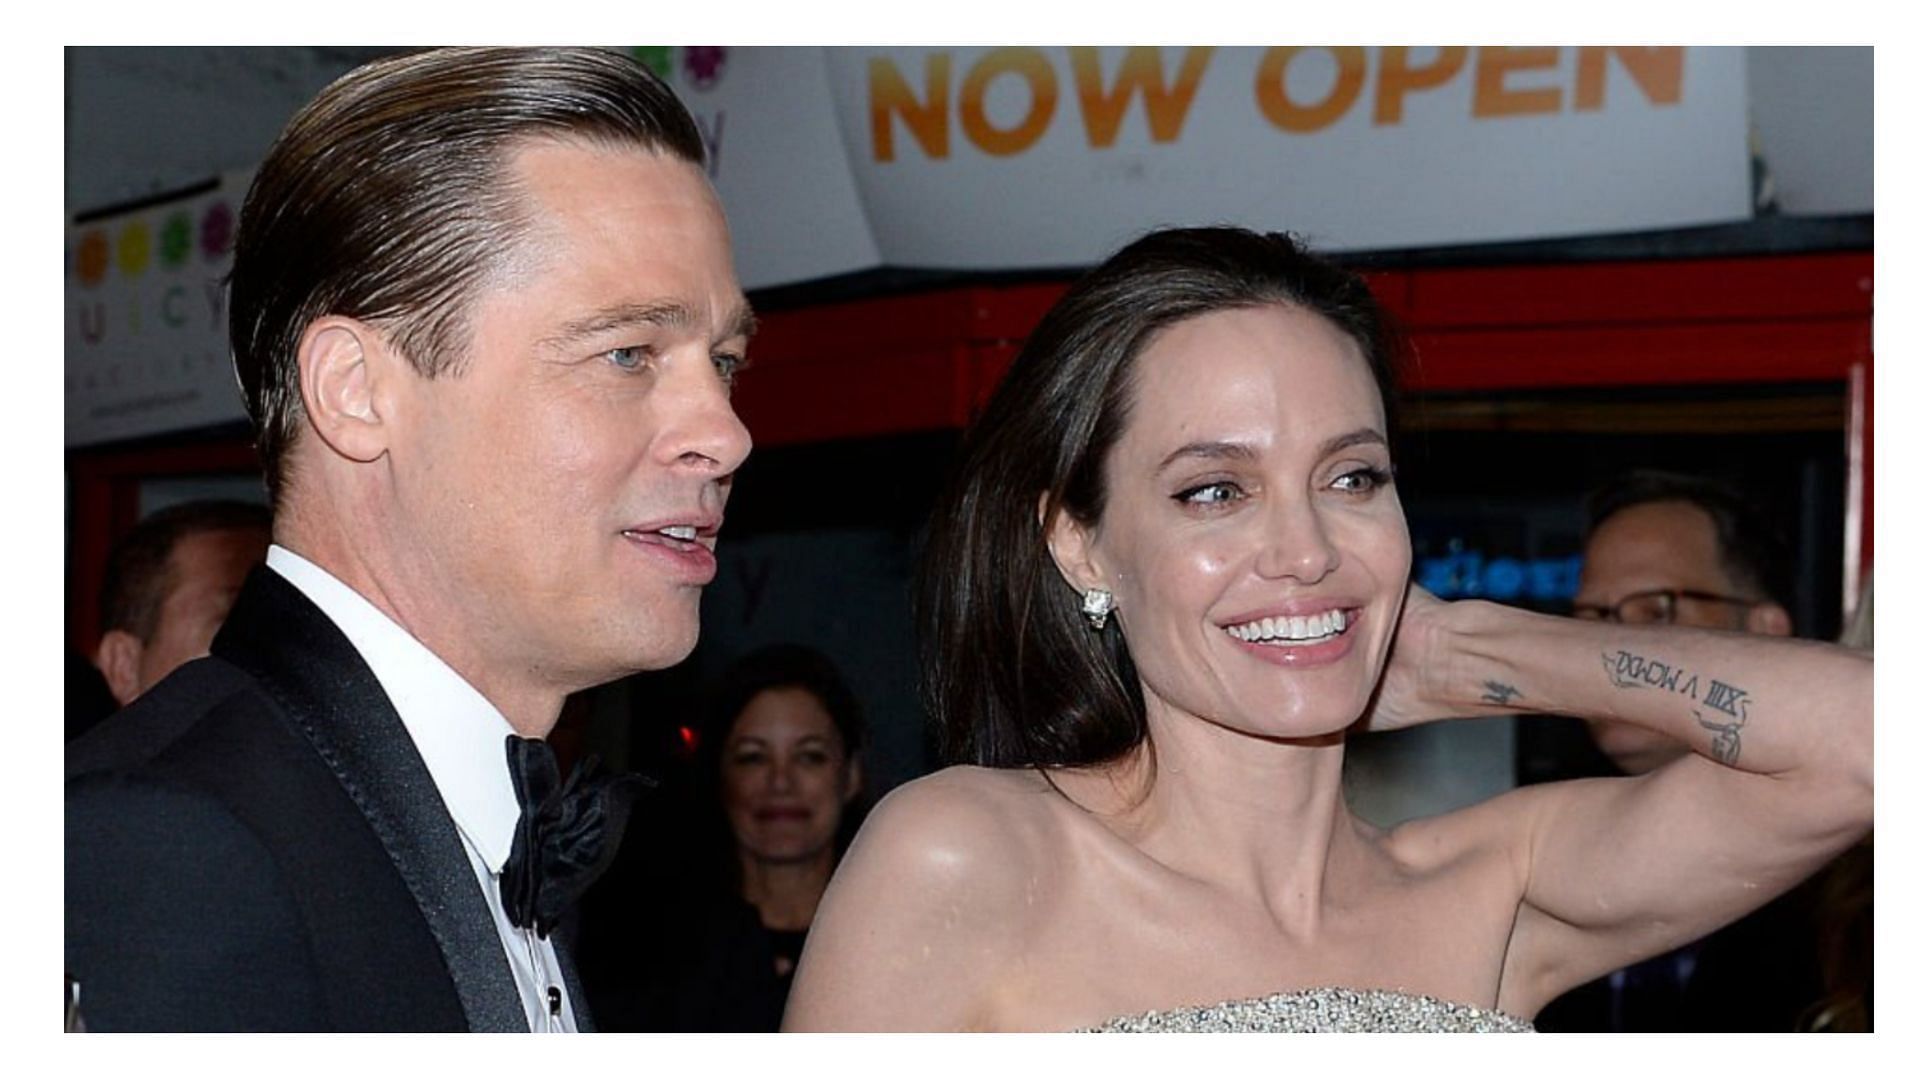 Brad Pitt has accused Angelina Jolie of damaging the reputation of his Chateau Miraval business (Image via Kevork S. Djansezian/Getty Images)